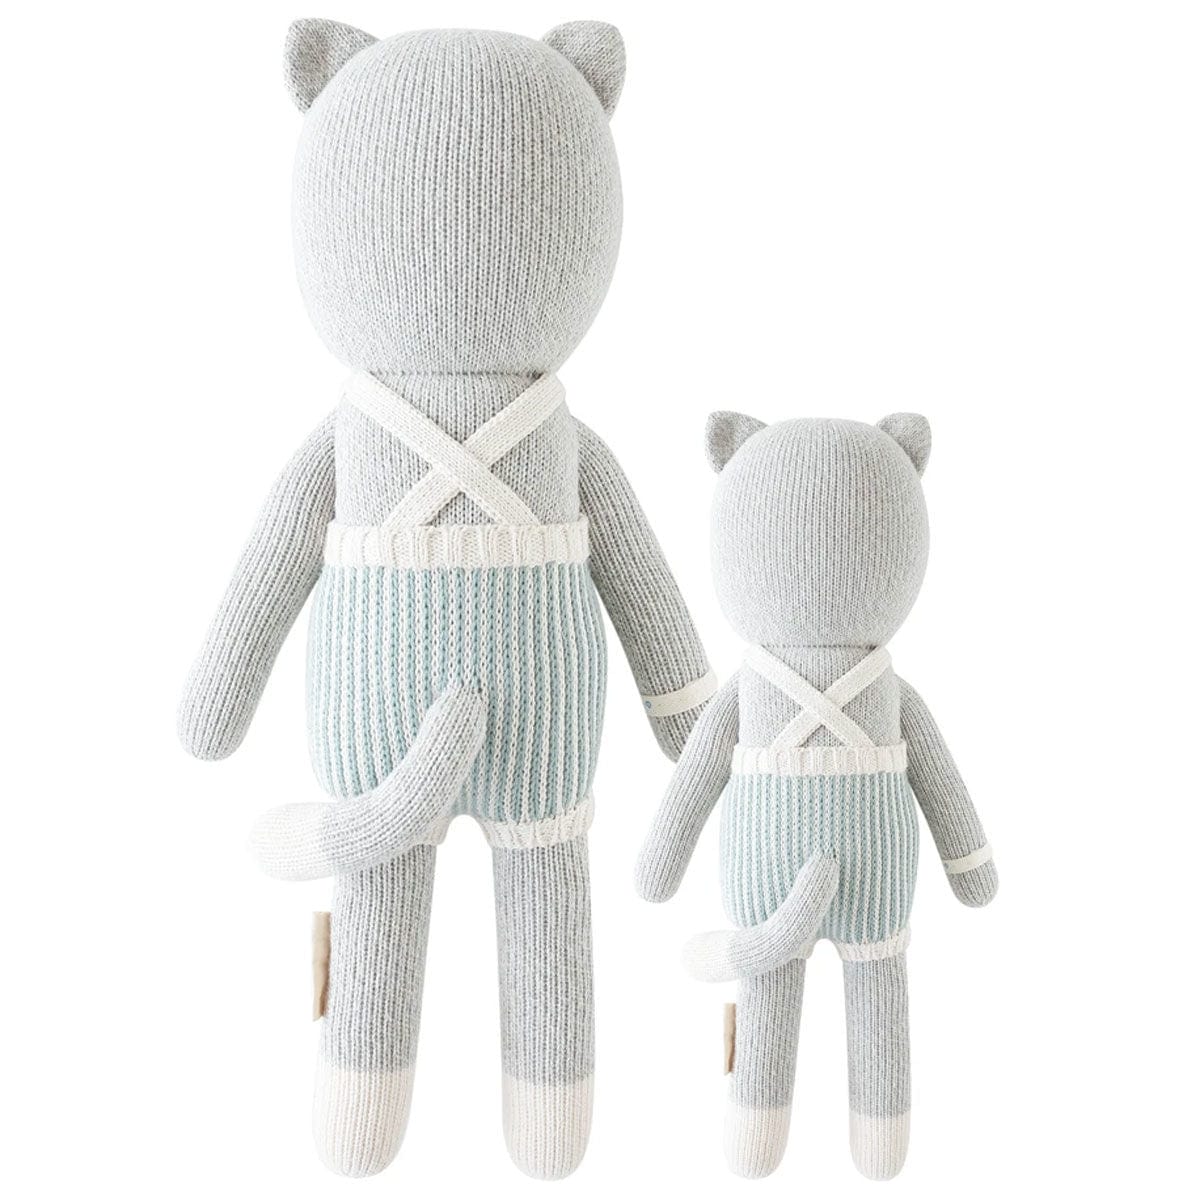 cuddle + kind doll cuddle + kind Hand-Knit Doll - Dylan the Kitten